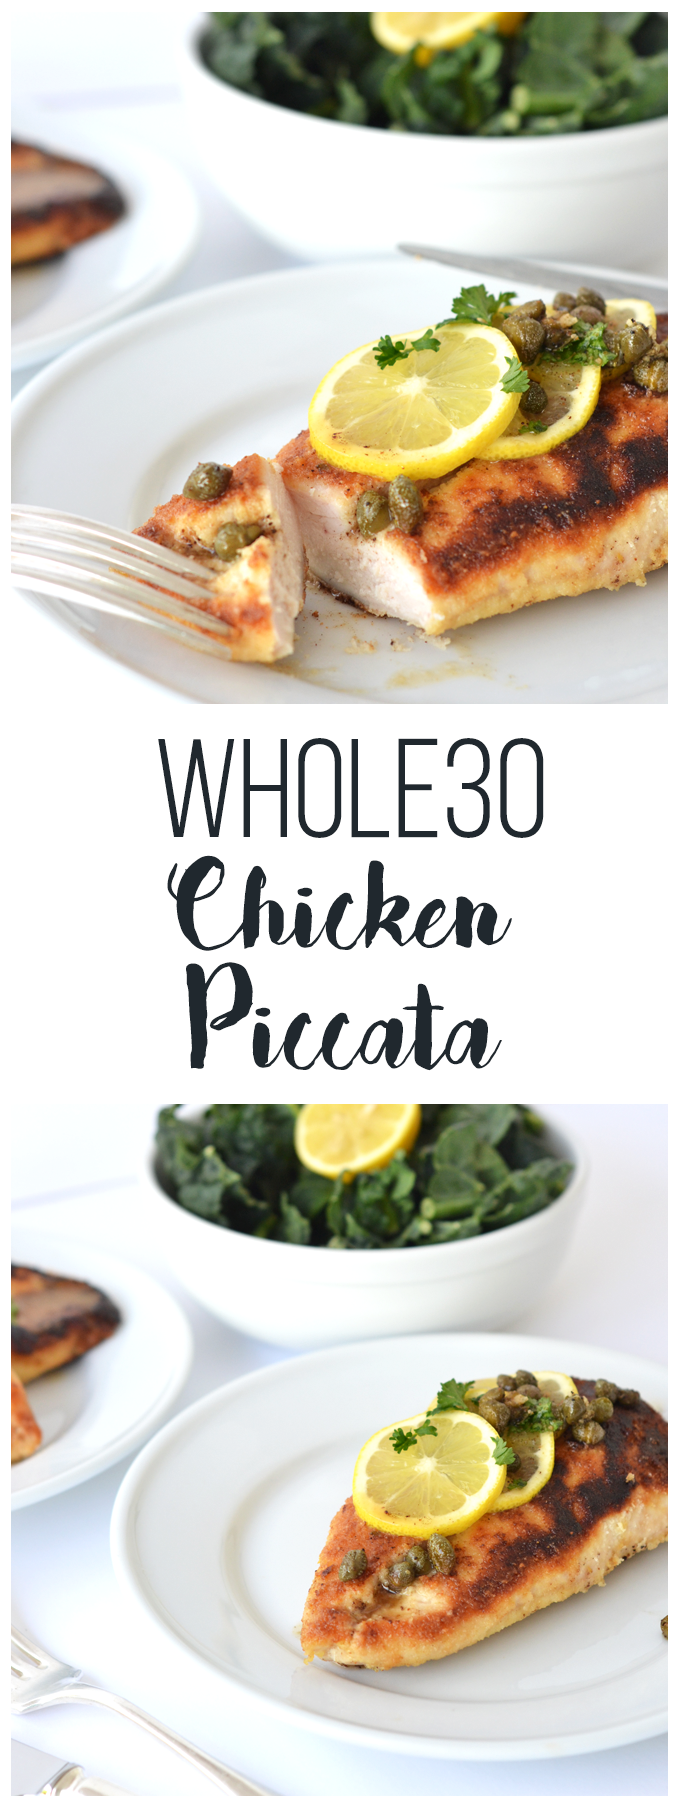 Whole30 Chicken Piccata tastes just like the original with one healthy swap! This is a great healthy weeknight dinner!